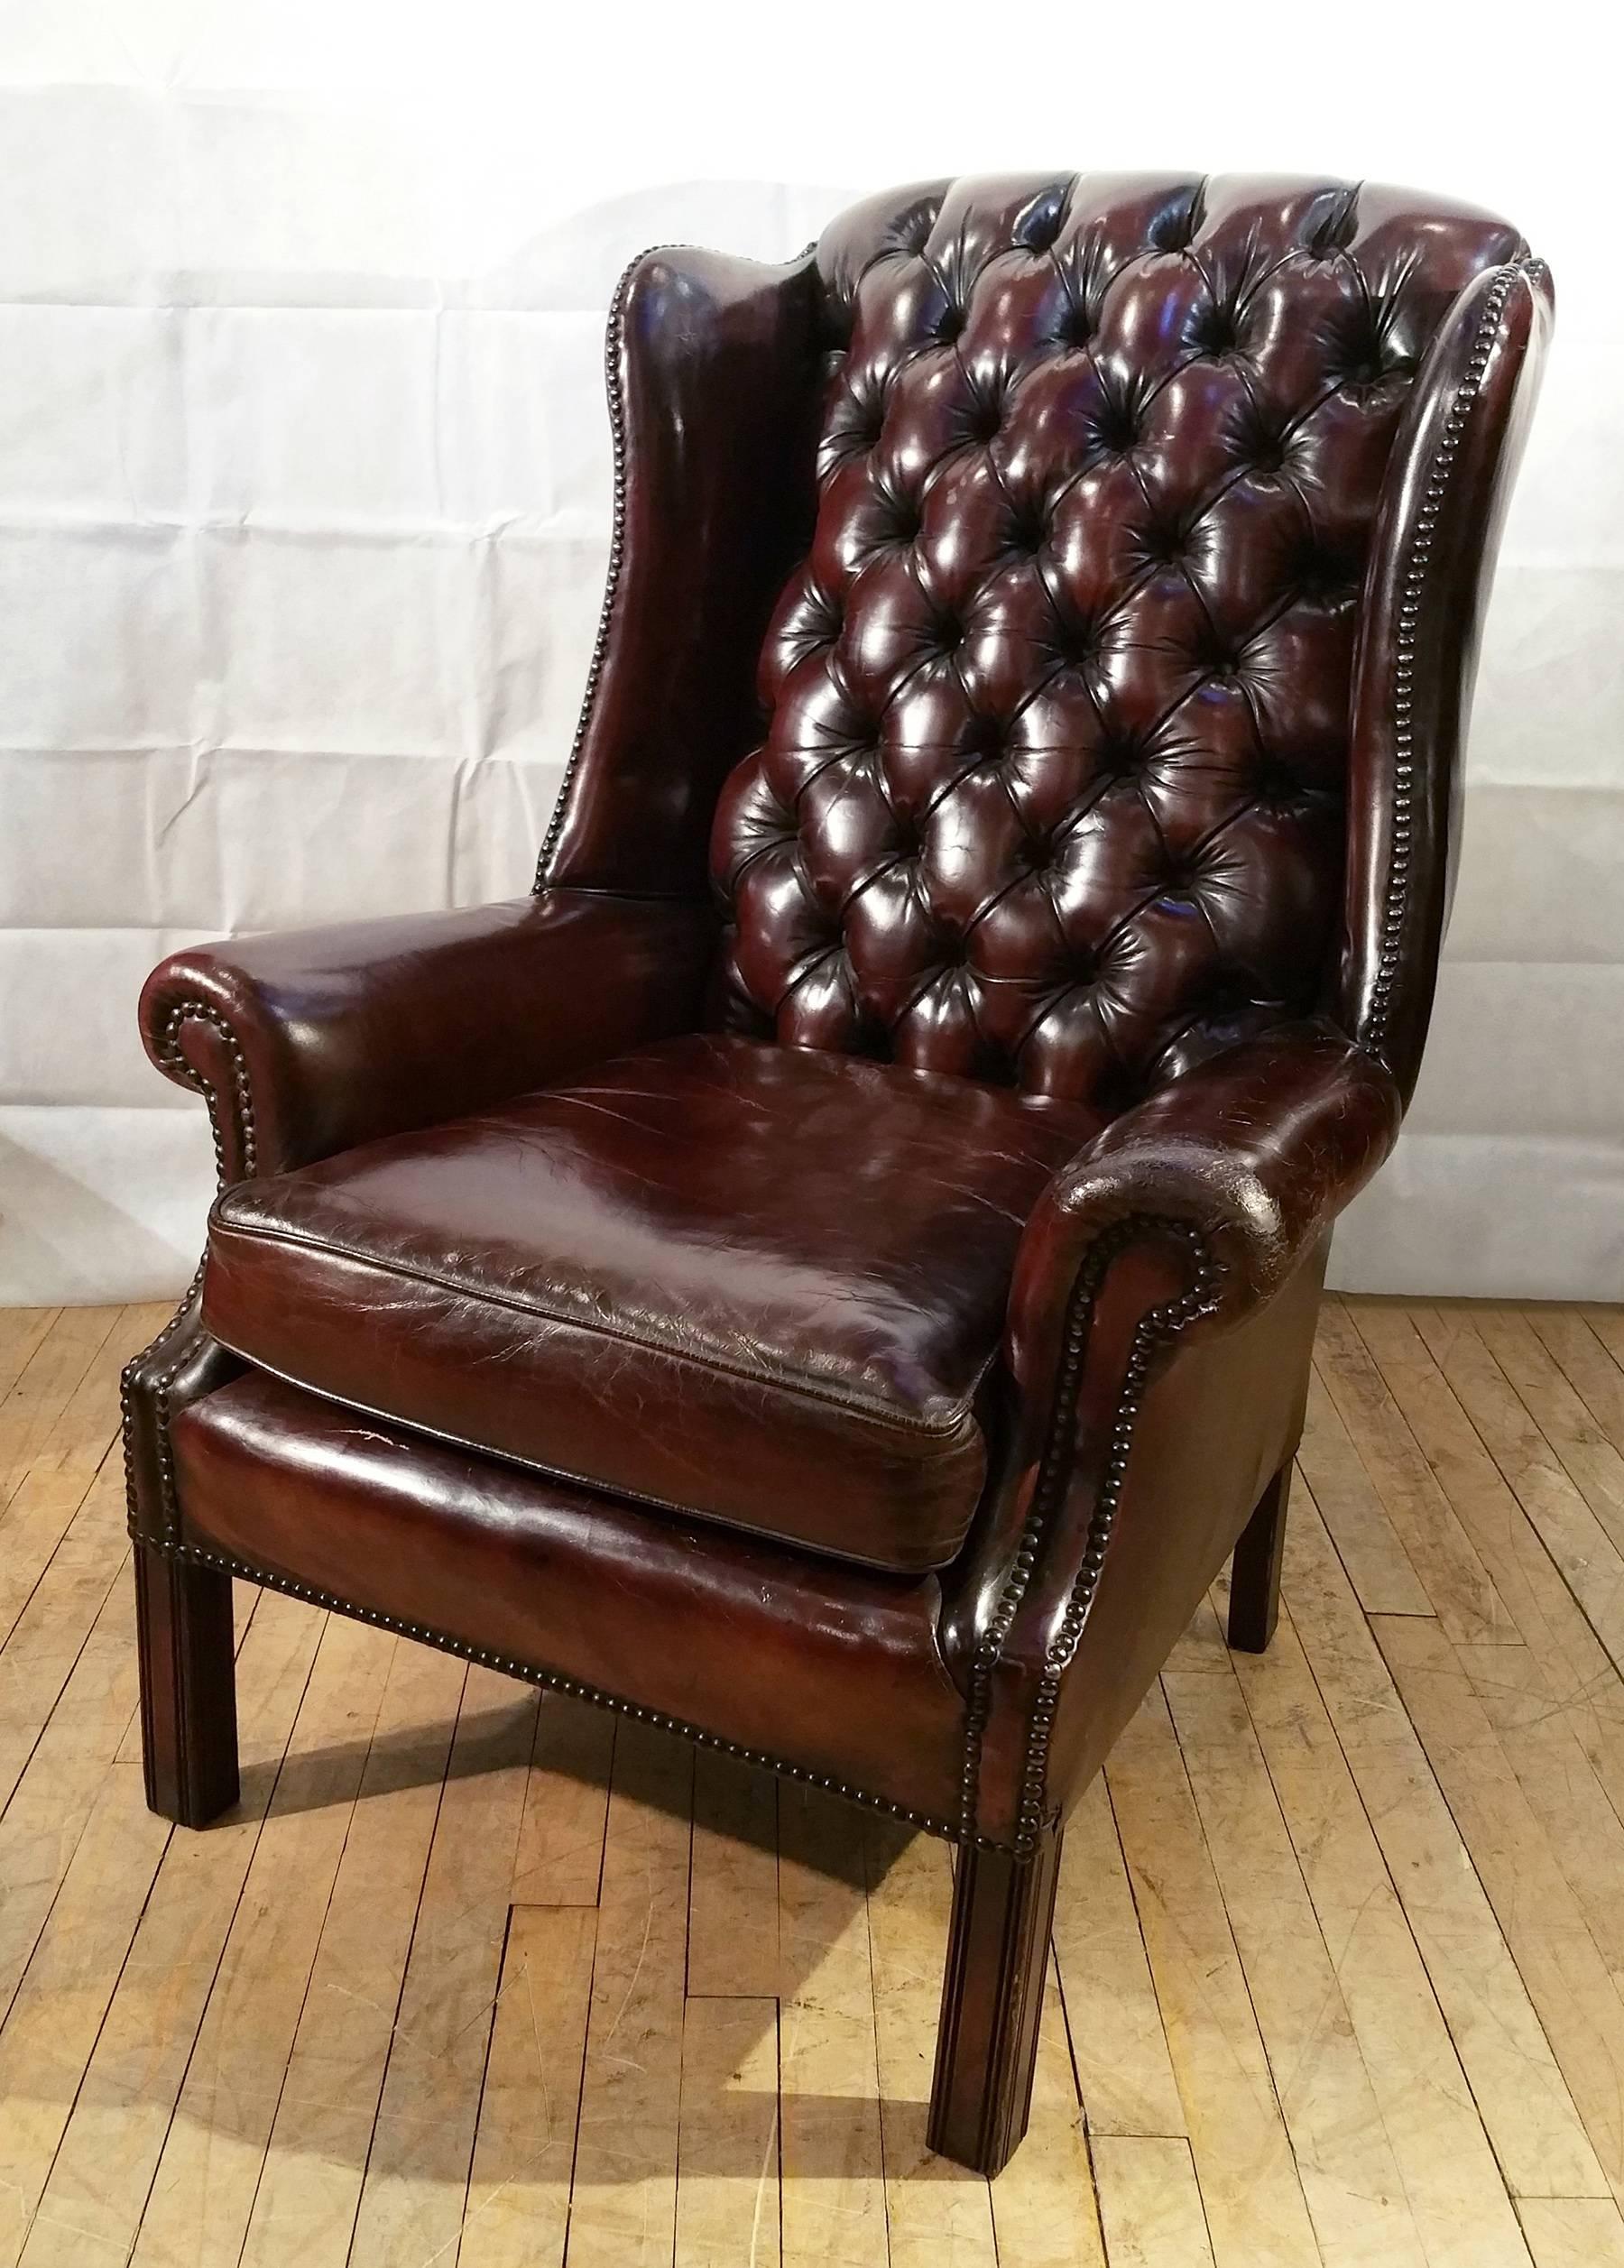 This gorgeous pair of deep buttoned leather wingchairs are upholstered in a rich warm dark burgundy color. The chairs feature a separate squab seat cushion with curled back arm rests and Stand on square leg supports. Each measures 29 ¾ in – 75.5 cm